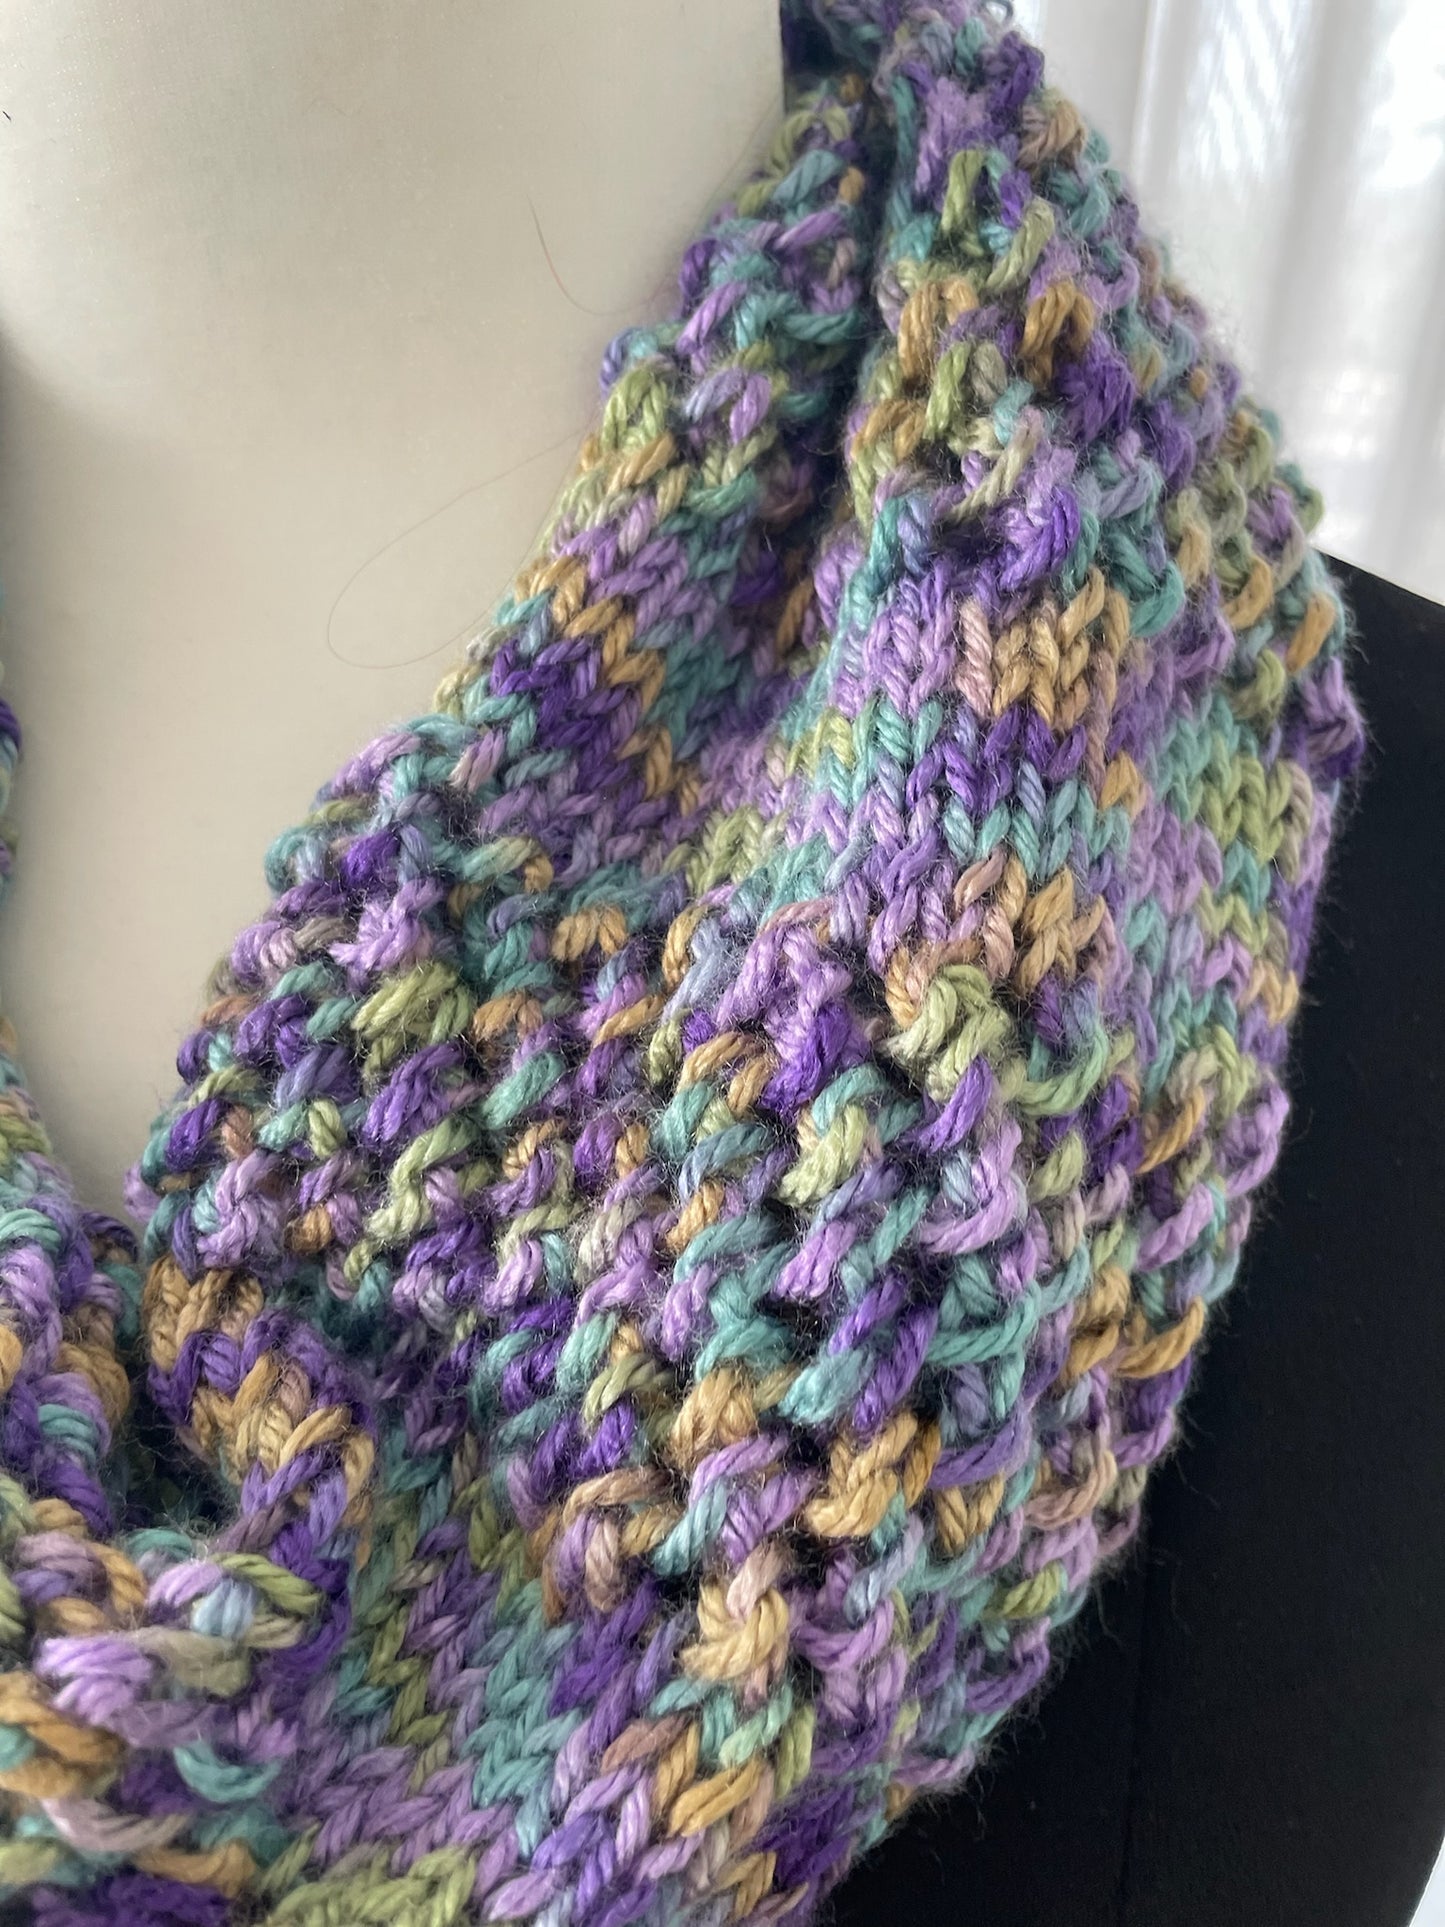 Hand knitted Vibrant Cowl